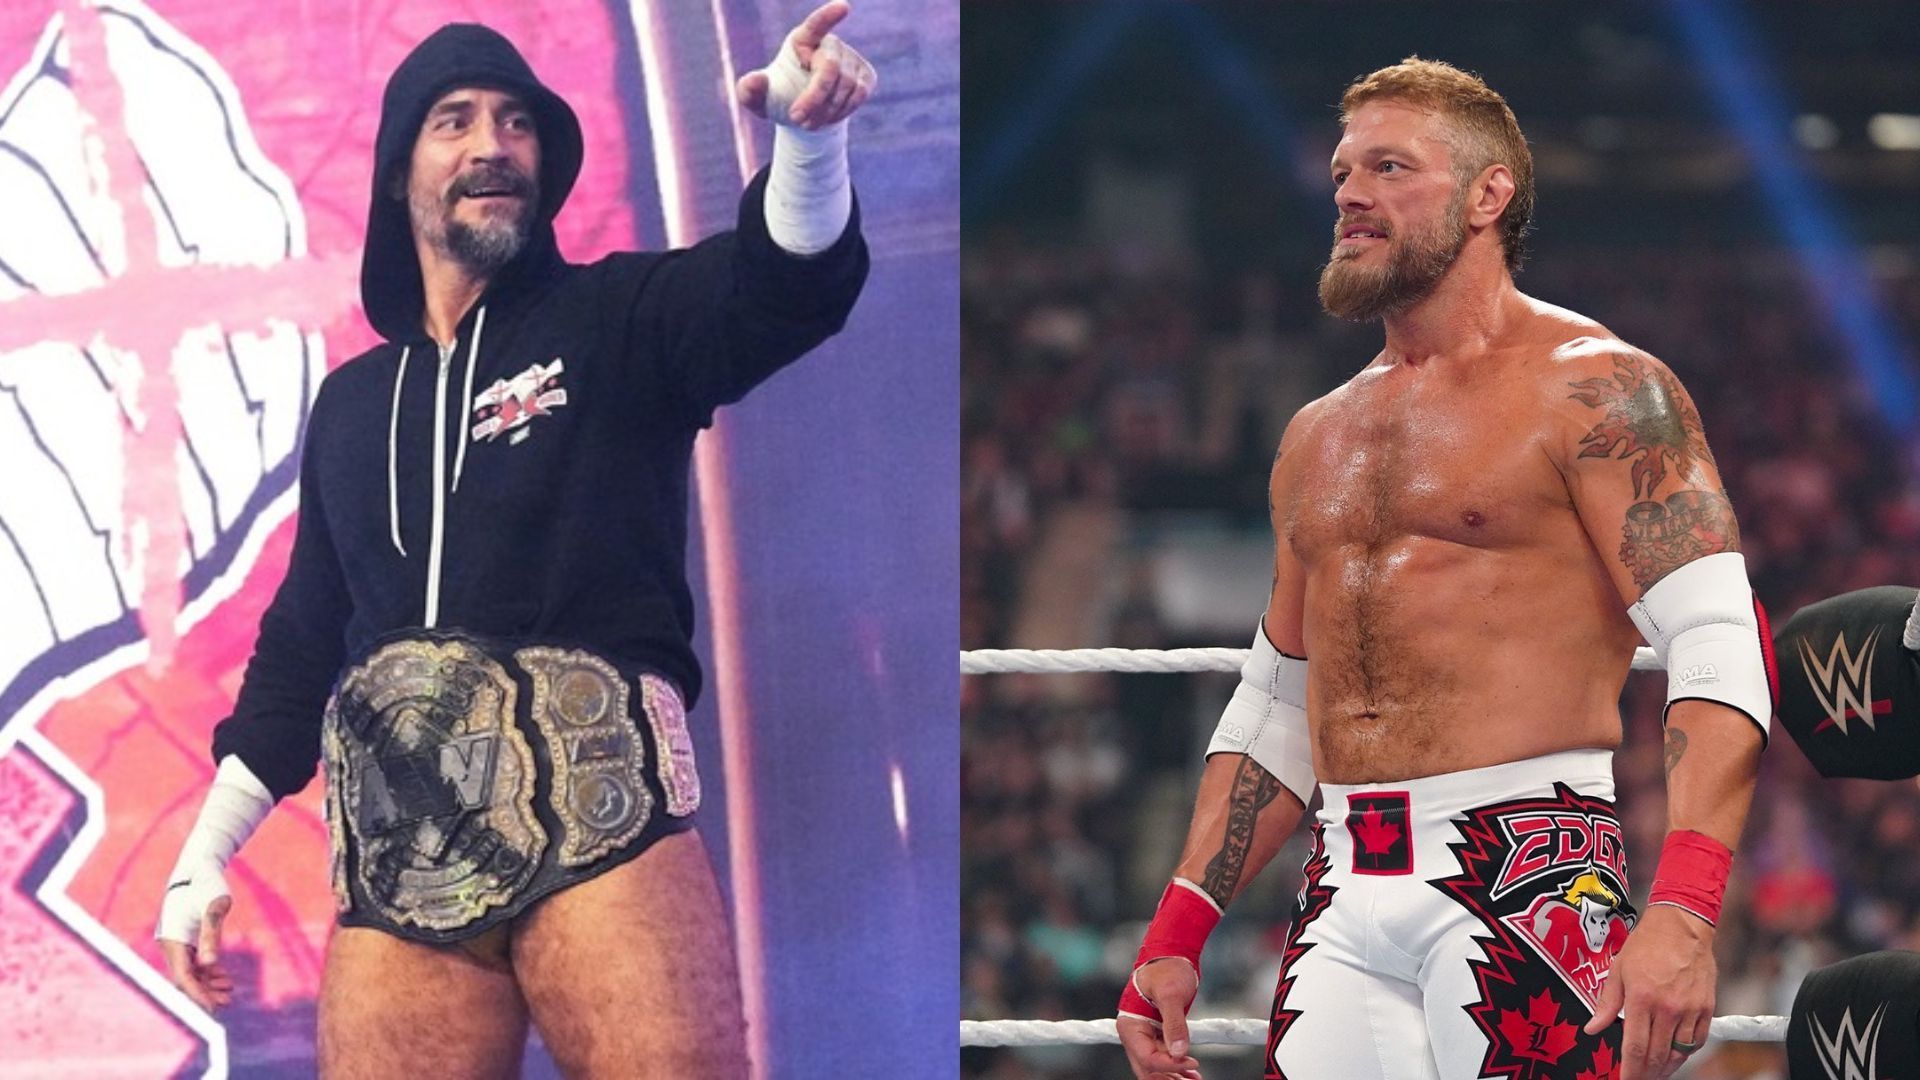 The Adam Copeland situation could be a cautionary tale to both Punk and WWE